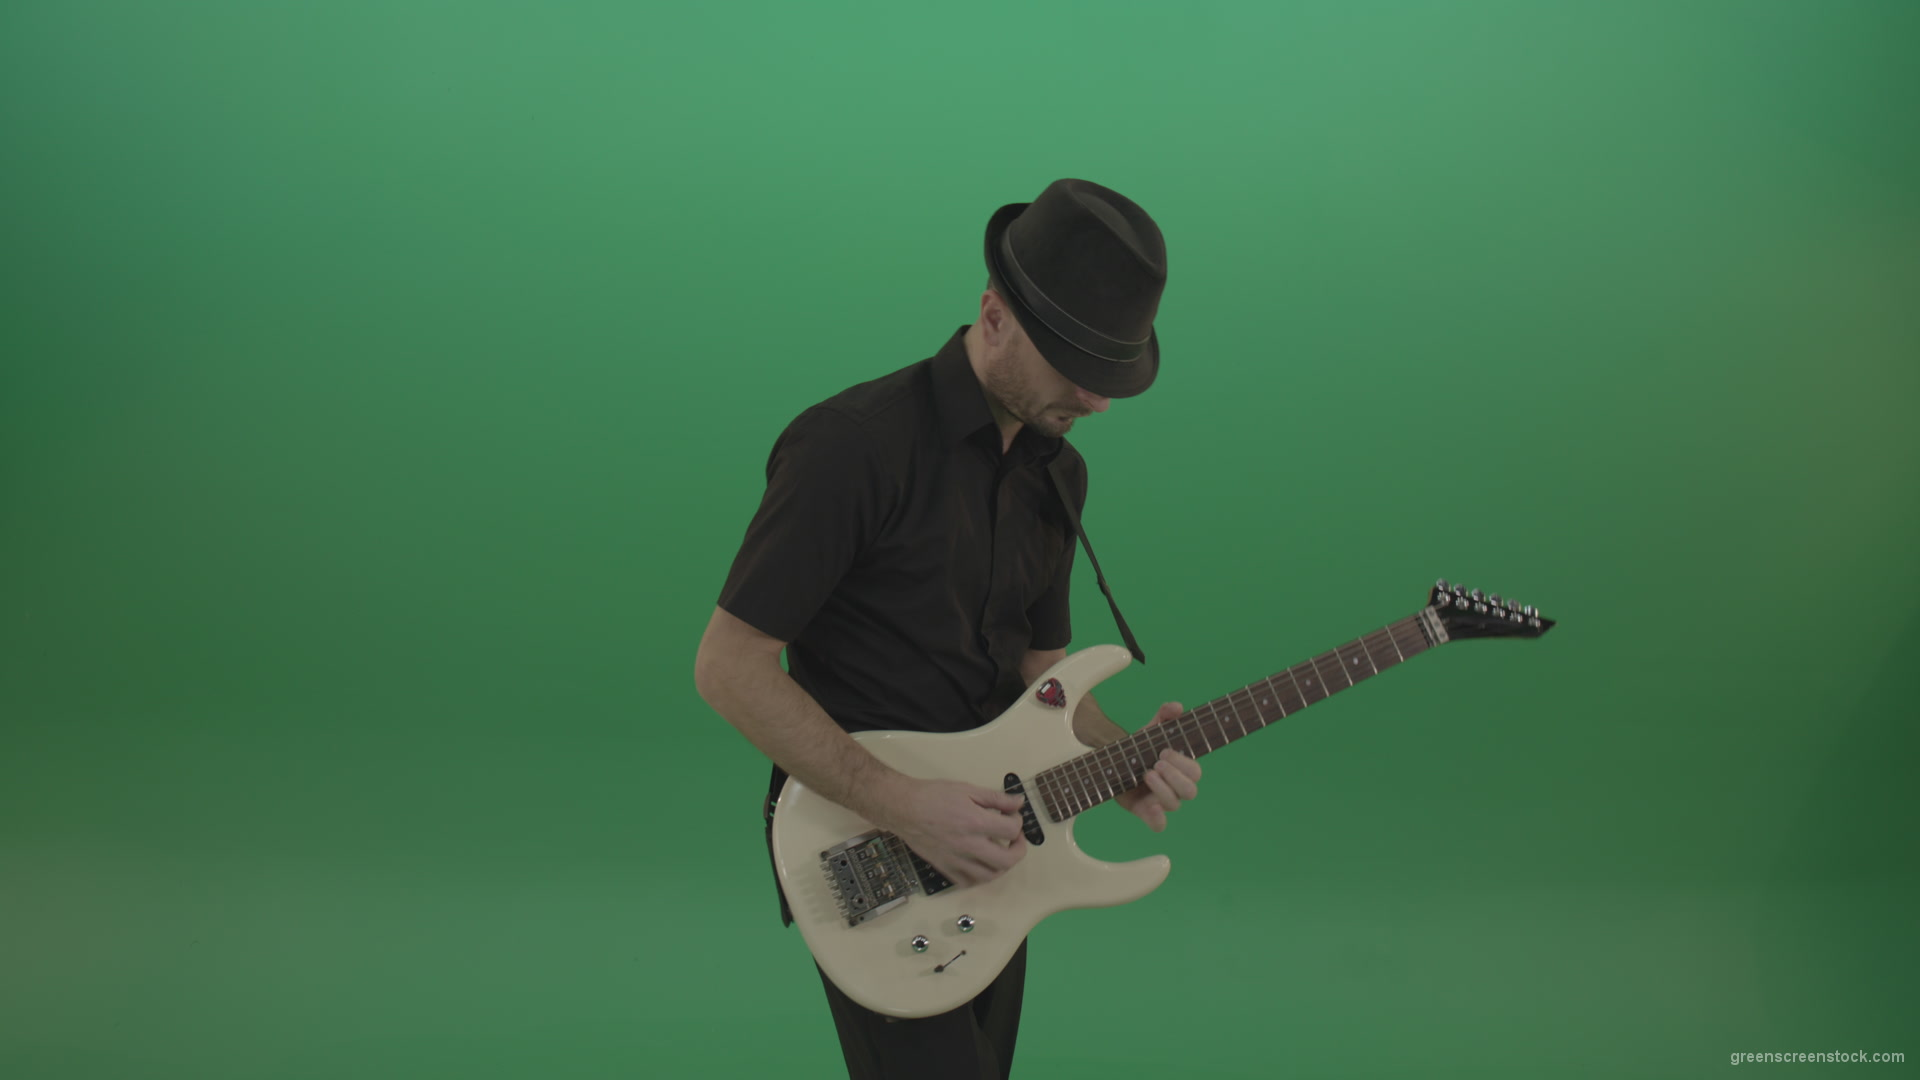 Virtuoso-guitarist-in-black-costume-and-hat-playing-solo-on-white-electro-guitar-siolated-on-green-screen_009 Green Screen Stock